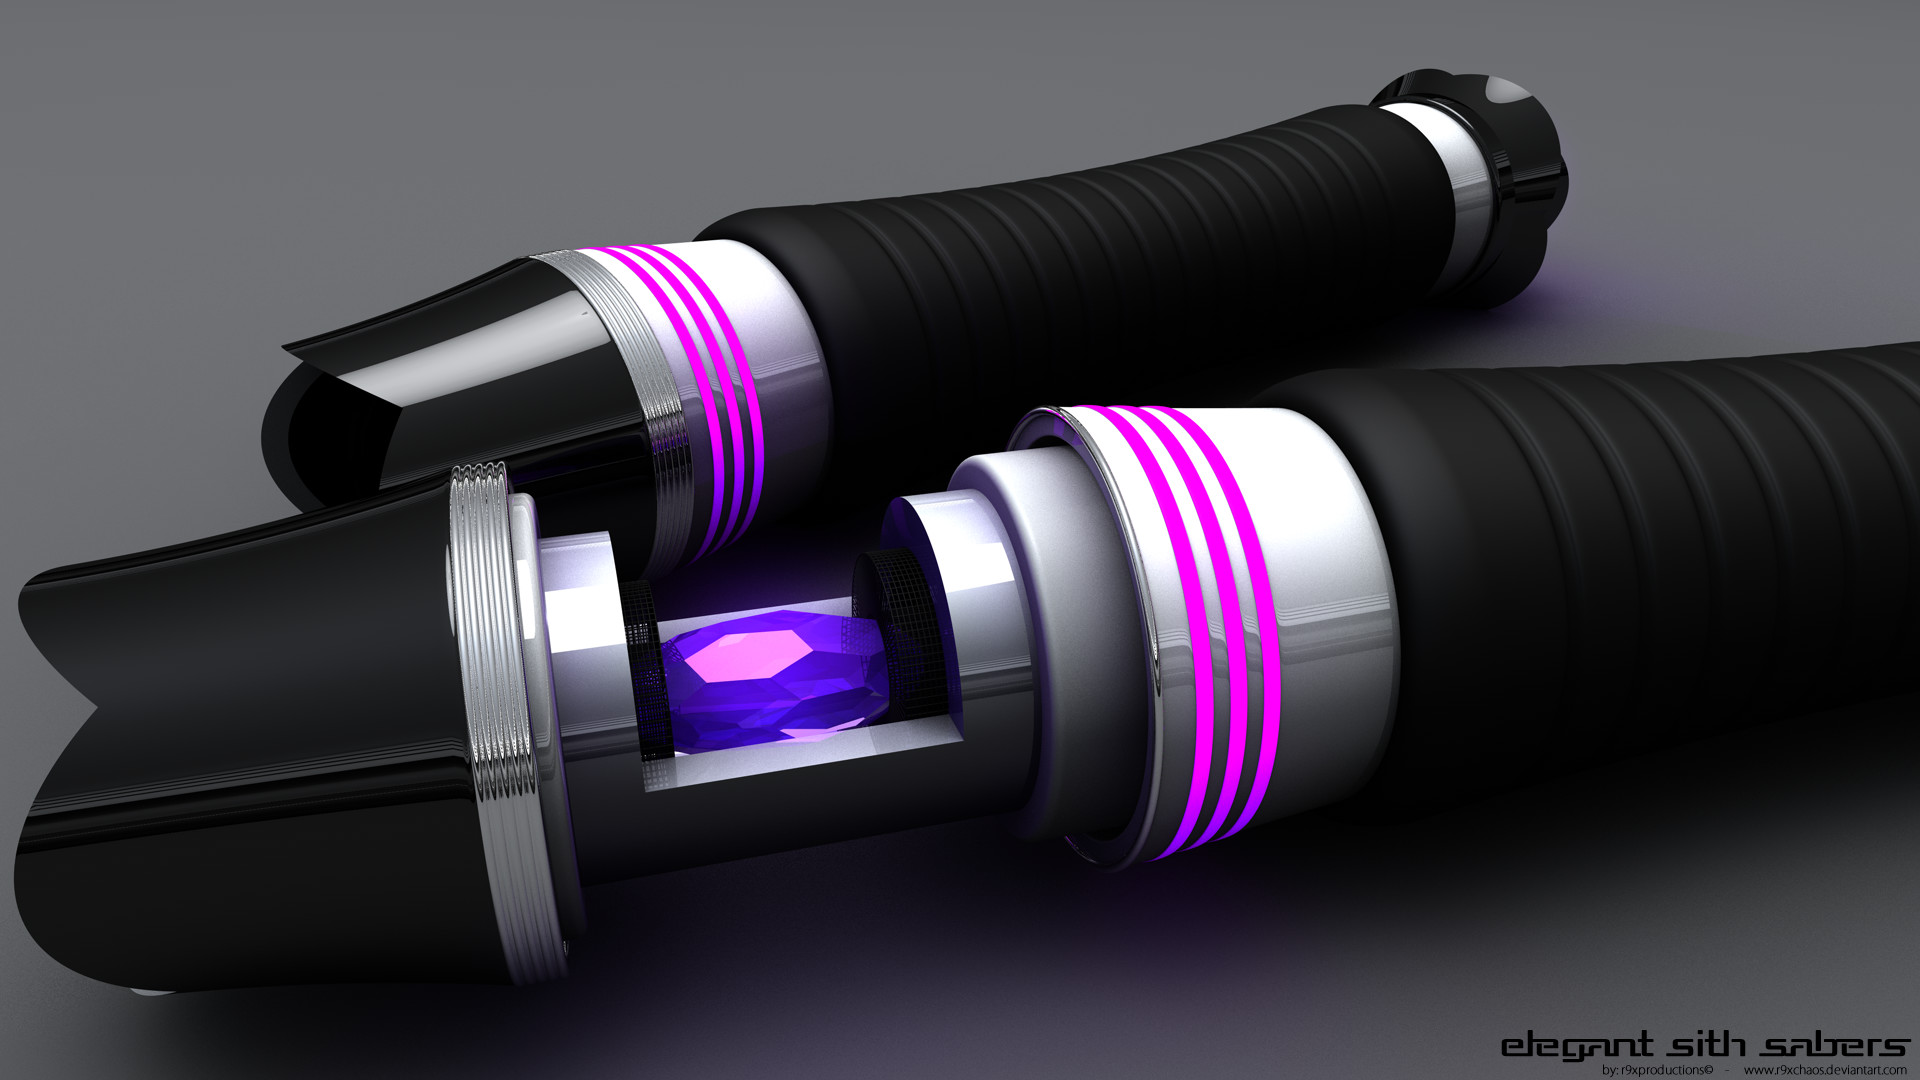 1920x1080 double bladed lightsaber same side - Google Search